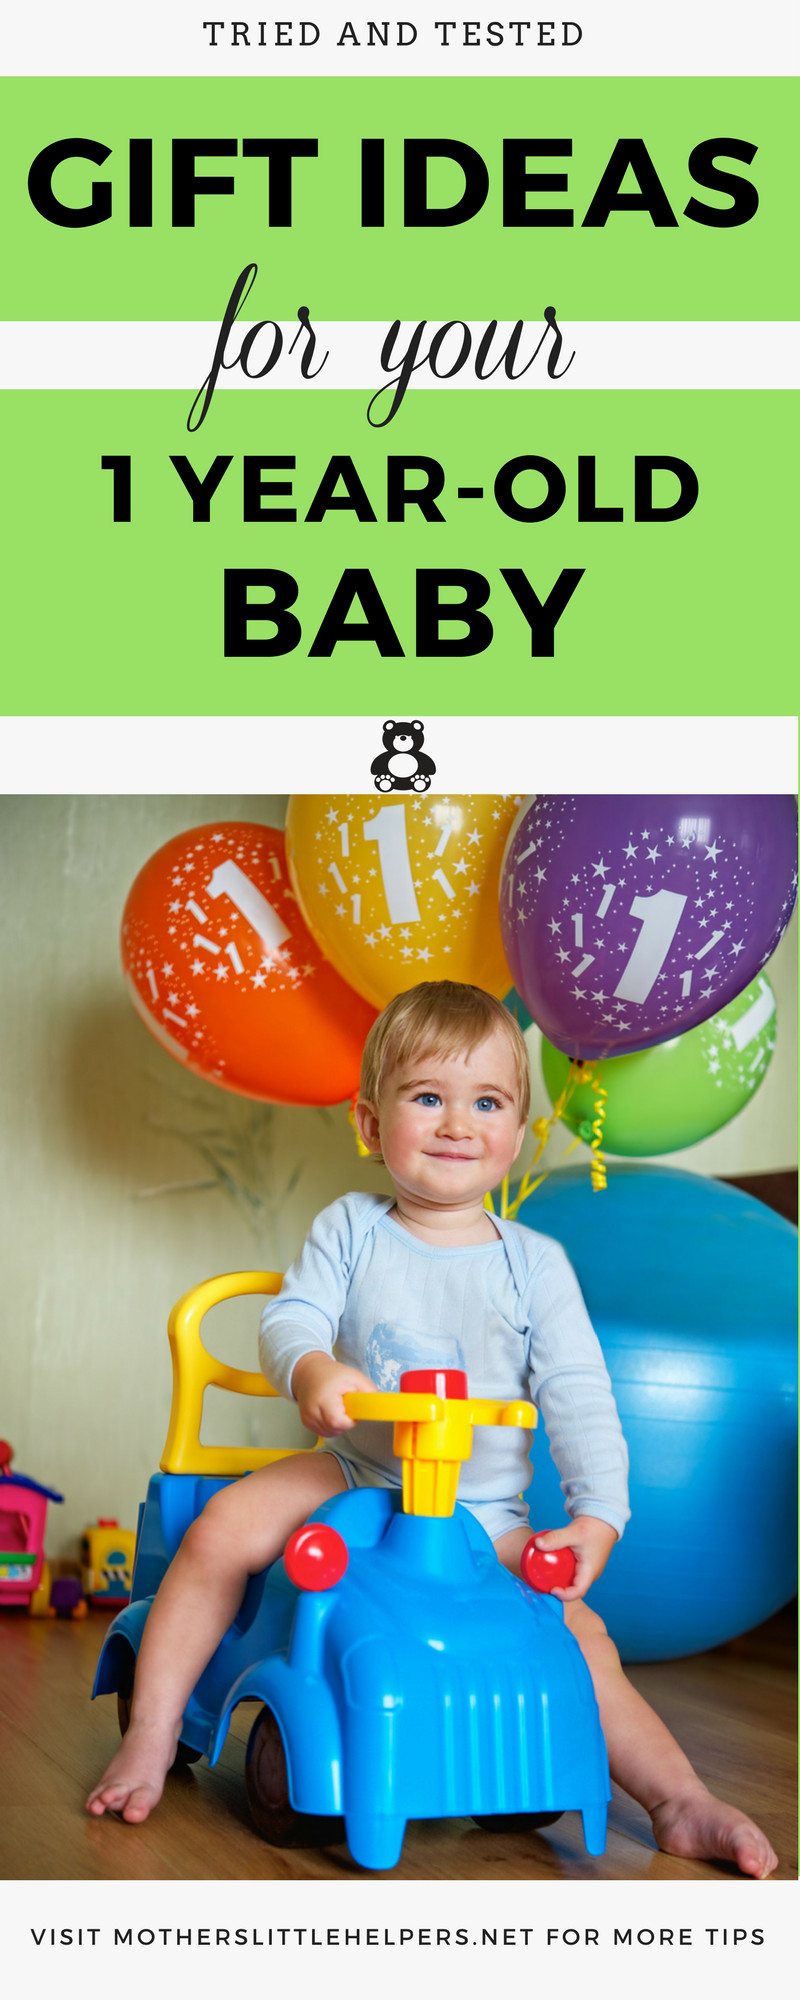 Best One Year Old Birthday Gifts
 Best Gift for e Year Old Baby Gift Guide 2019